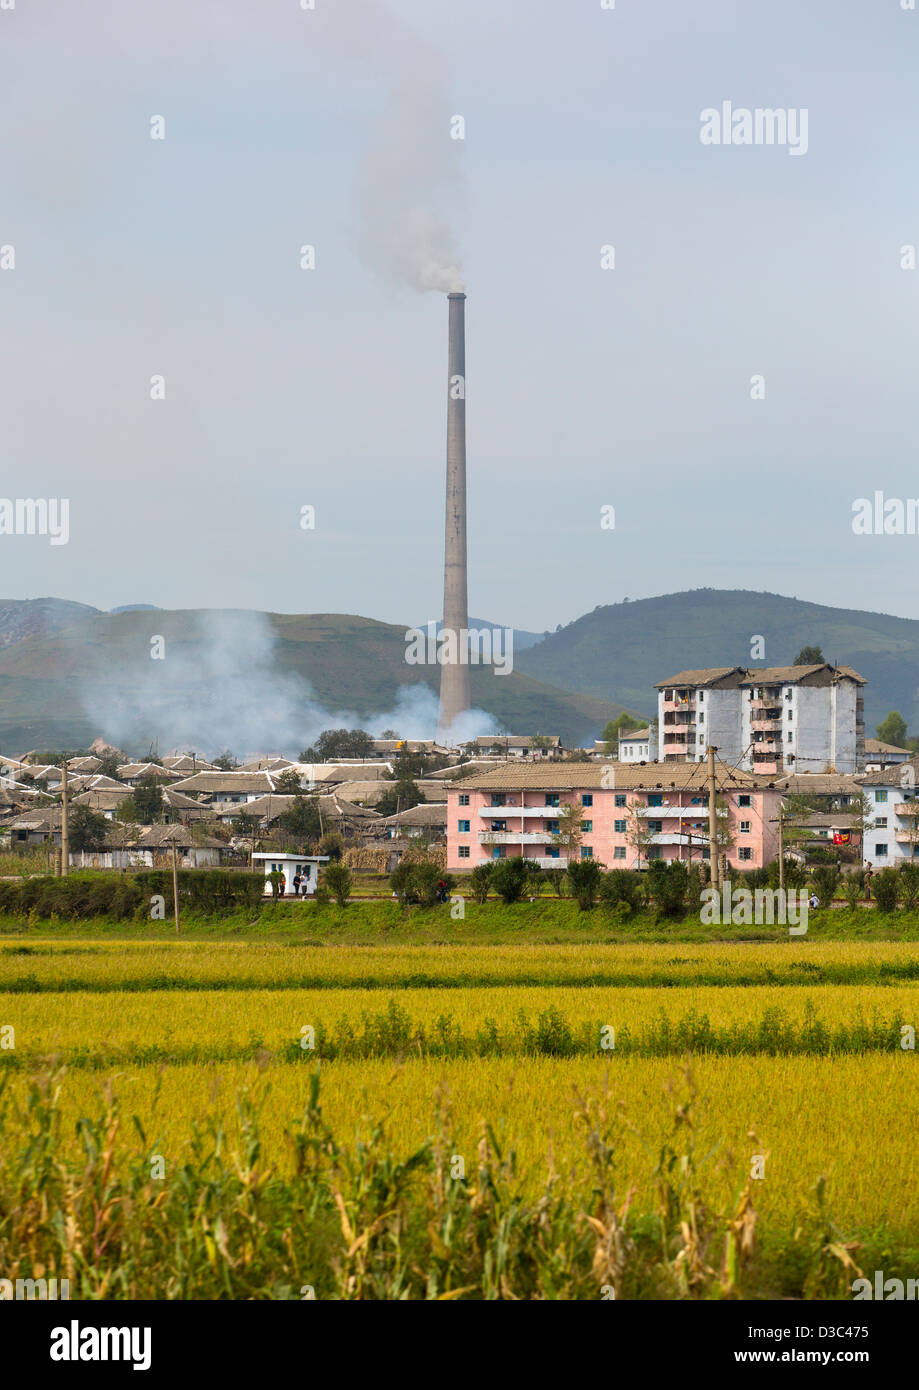 Giant Chime In A Village, Hamhung, North Korea Stock Photo